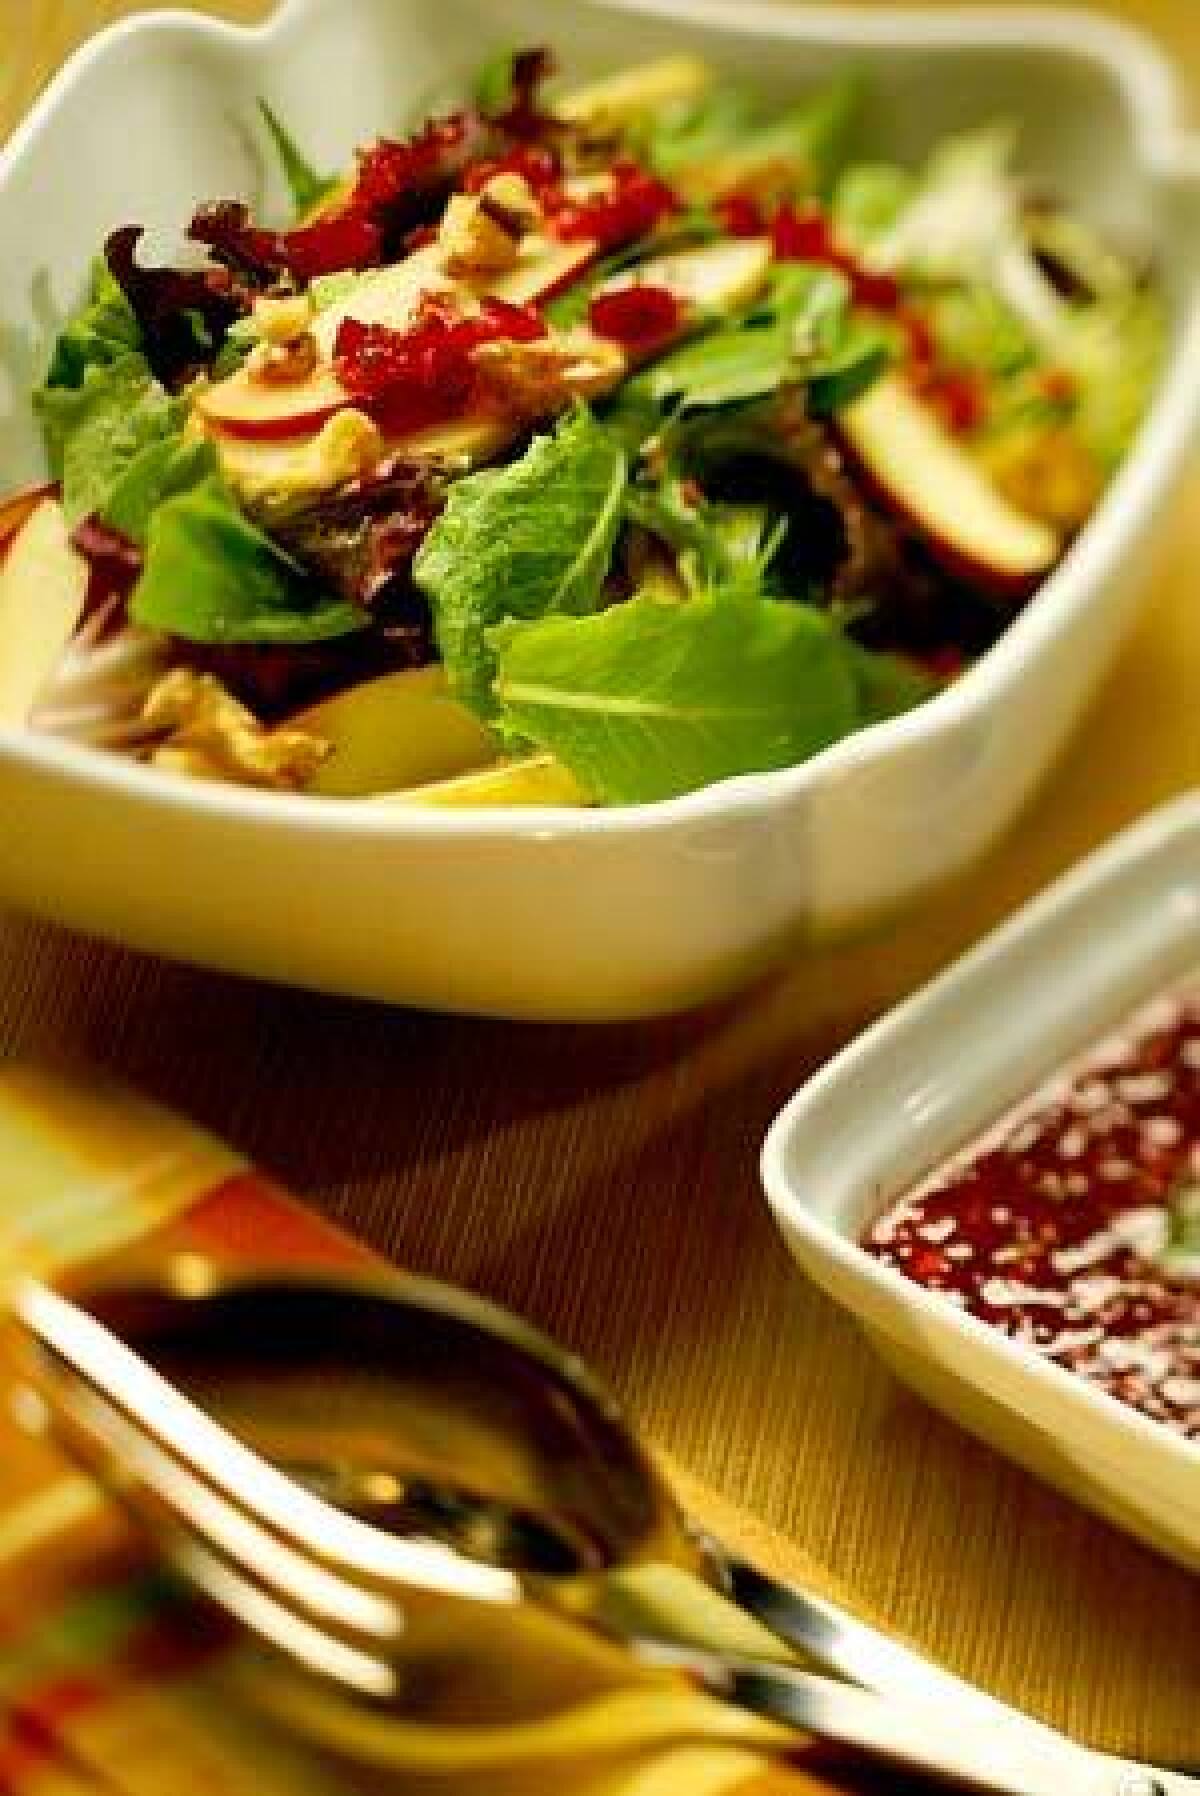 This salad is made with apple, pear, dried cranberries and toasted walnuts. Recipe: Pear and apple salad with cranberry vinaigrette